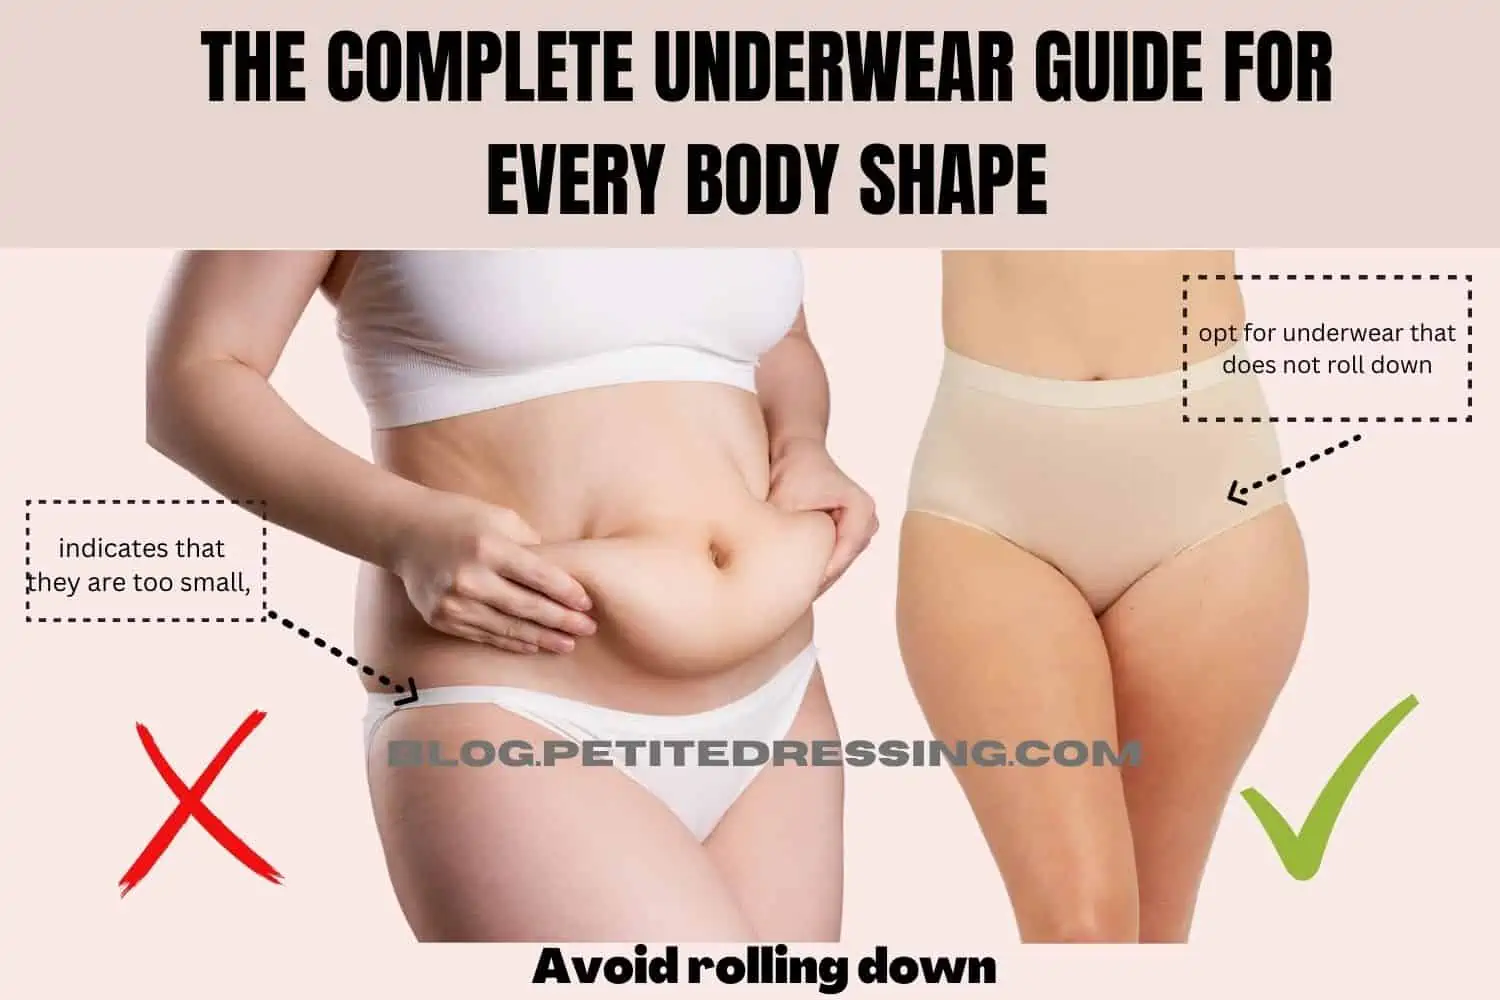 What type of panties give you more coverage at the bump? - Quora